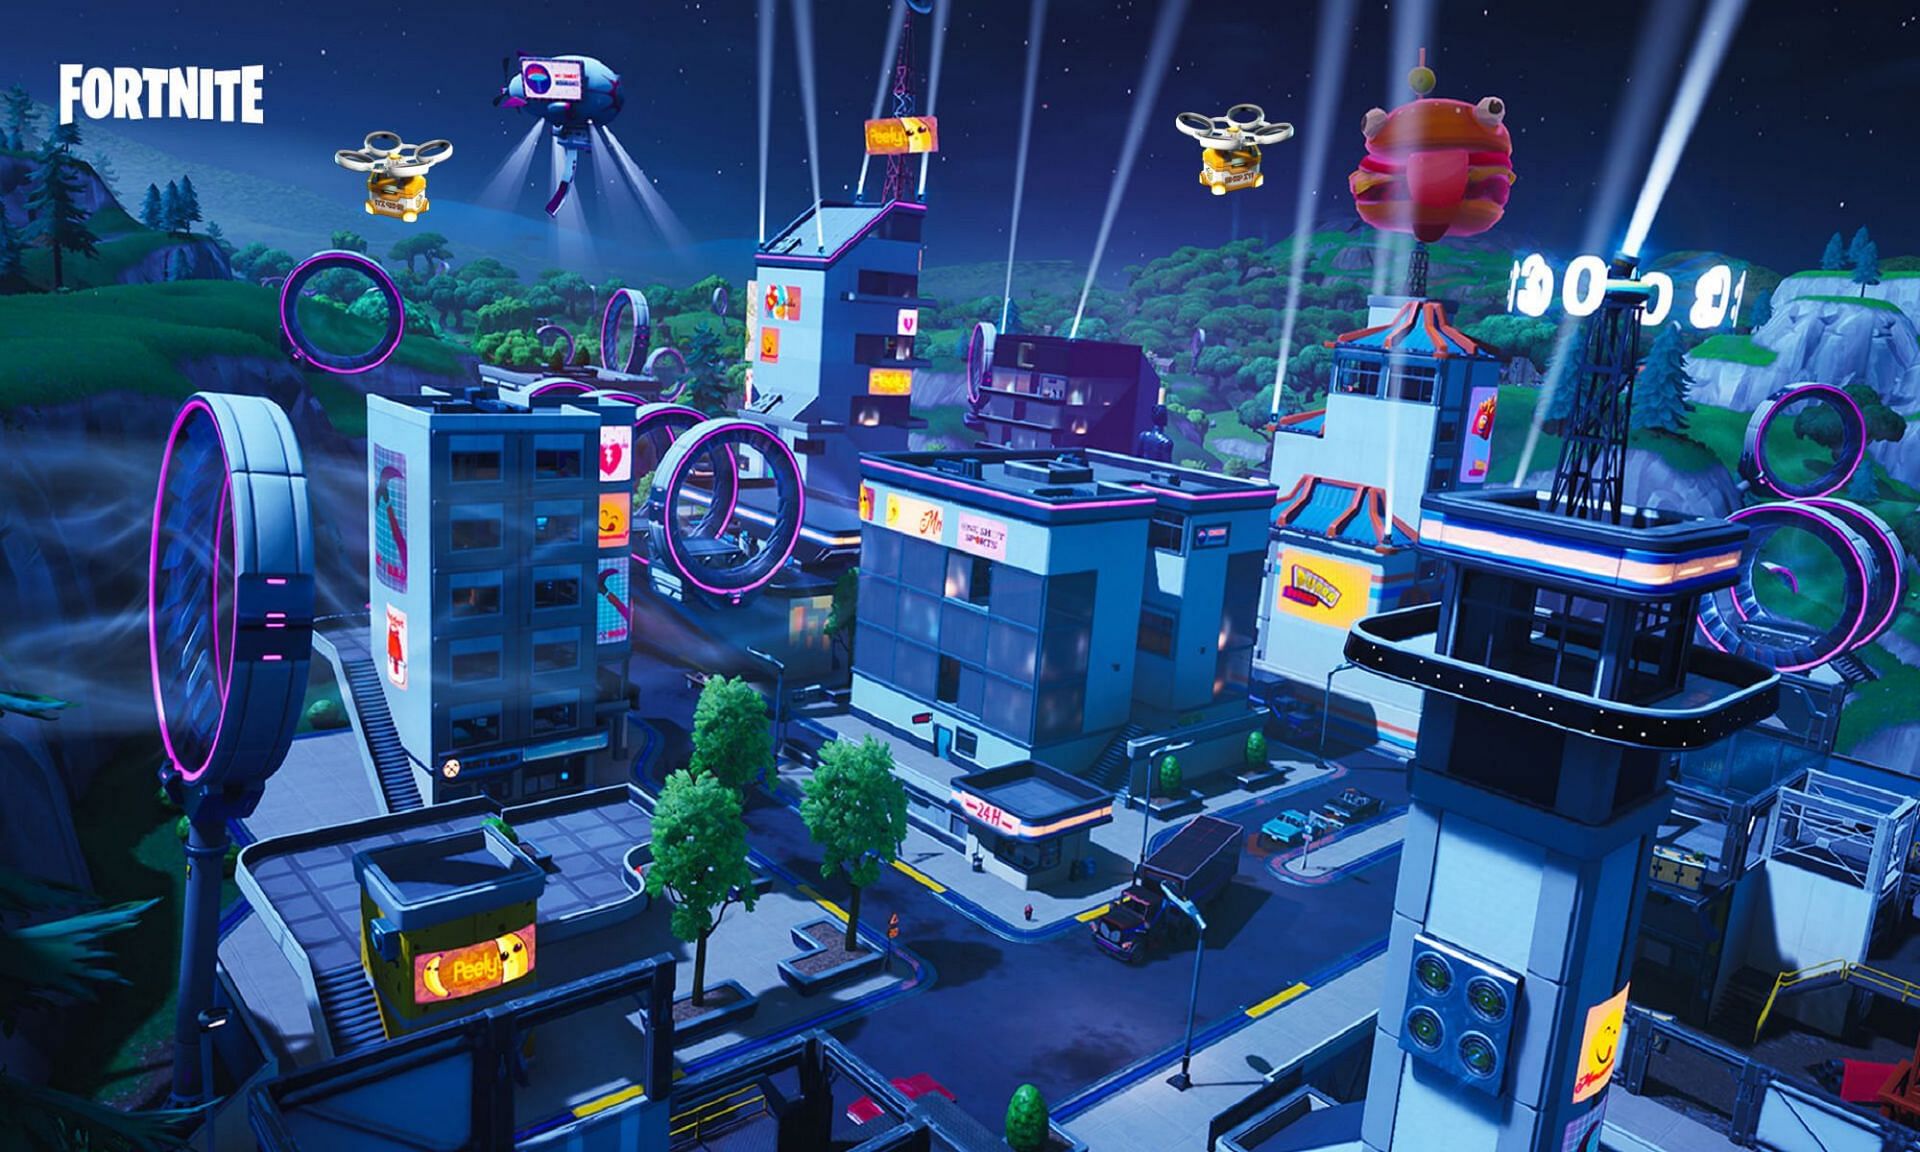 Will Supply Drones light up the night sky above Neo Tilted? (Image via Fortnite/Epic Games)